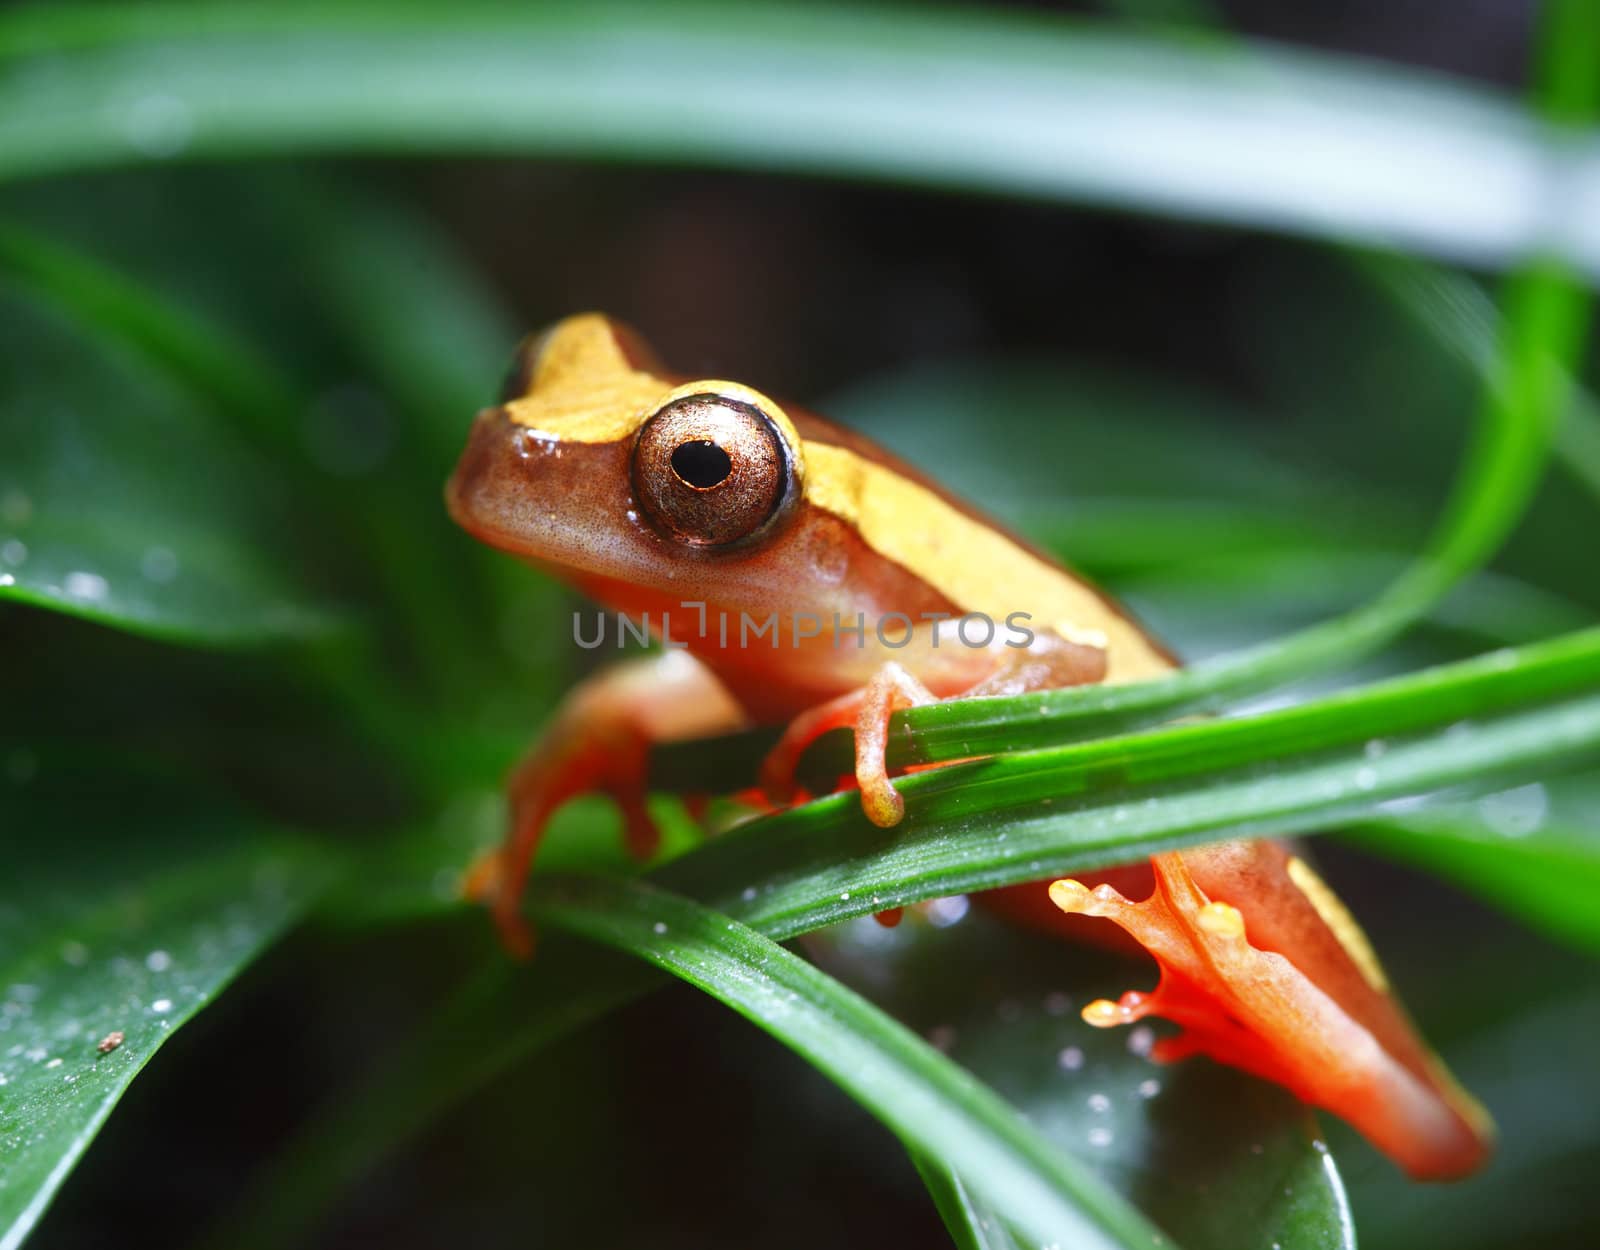 A macro shot of a clown tree frog (Dendropsophus Leucophyllatus) in its tropical surrounding. These tiny little frogs inhabit areas around bodies of water in the Amazon Basin, from Peru east through Brazil and the surrounding countries. 